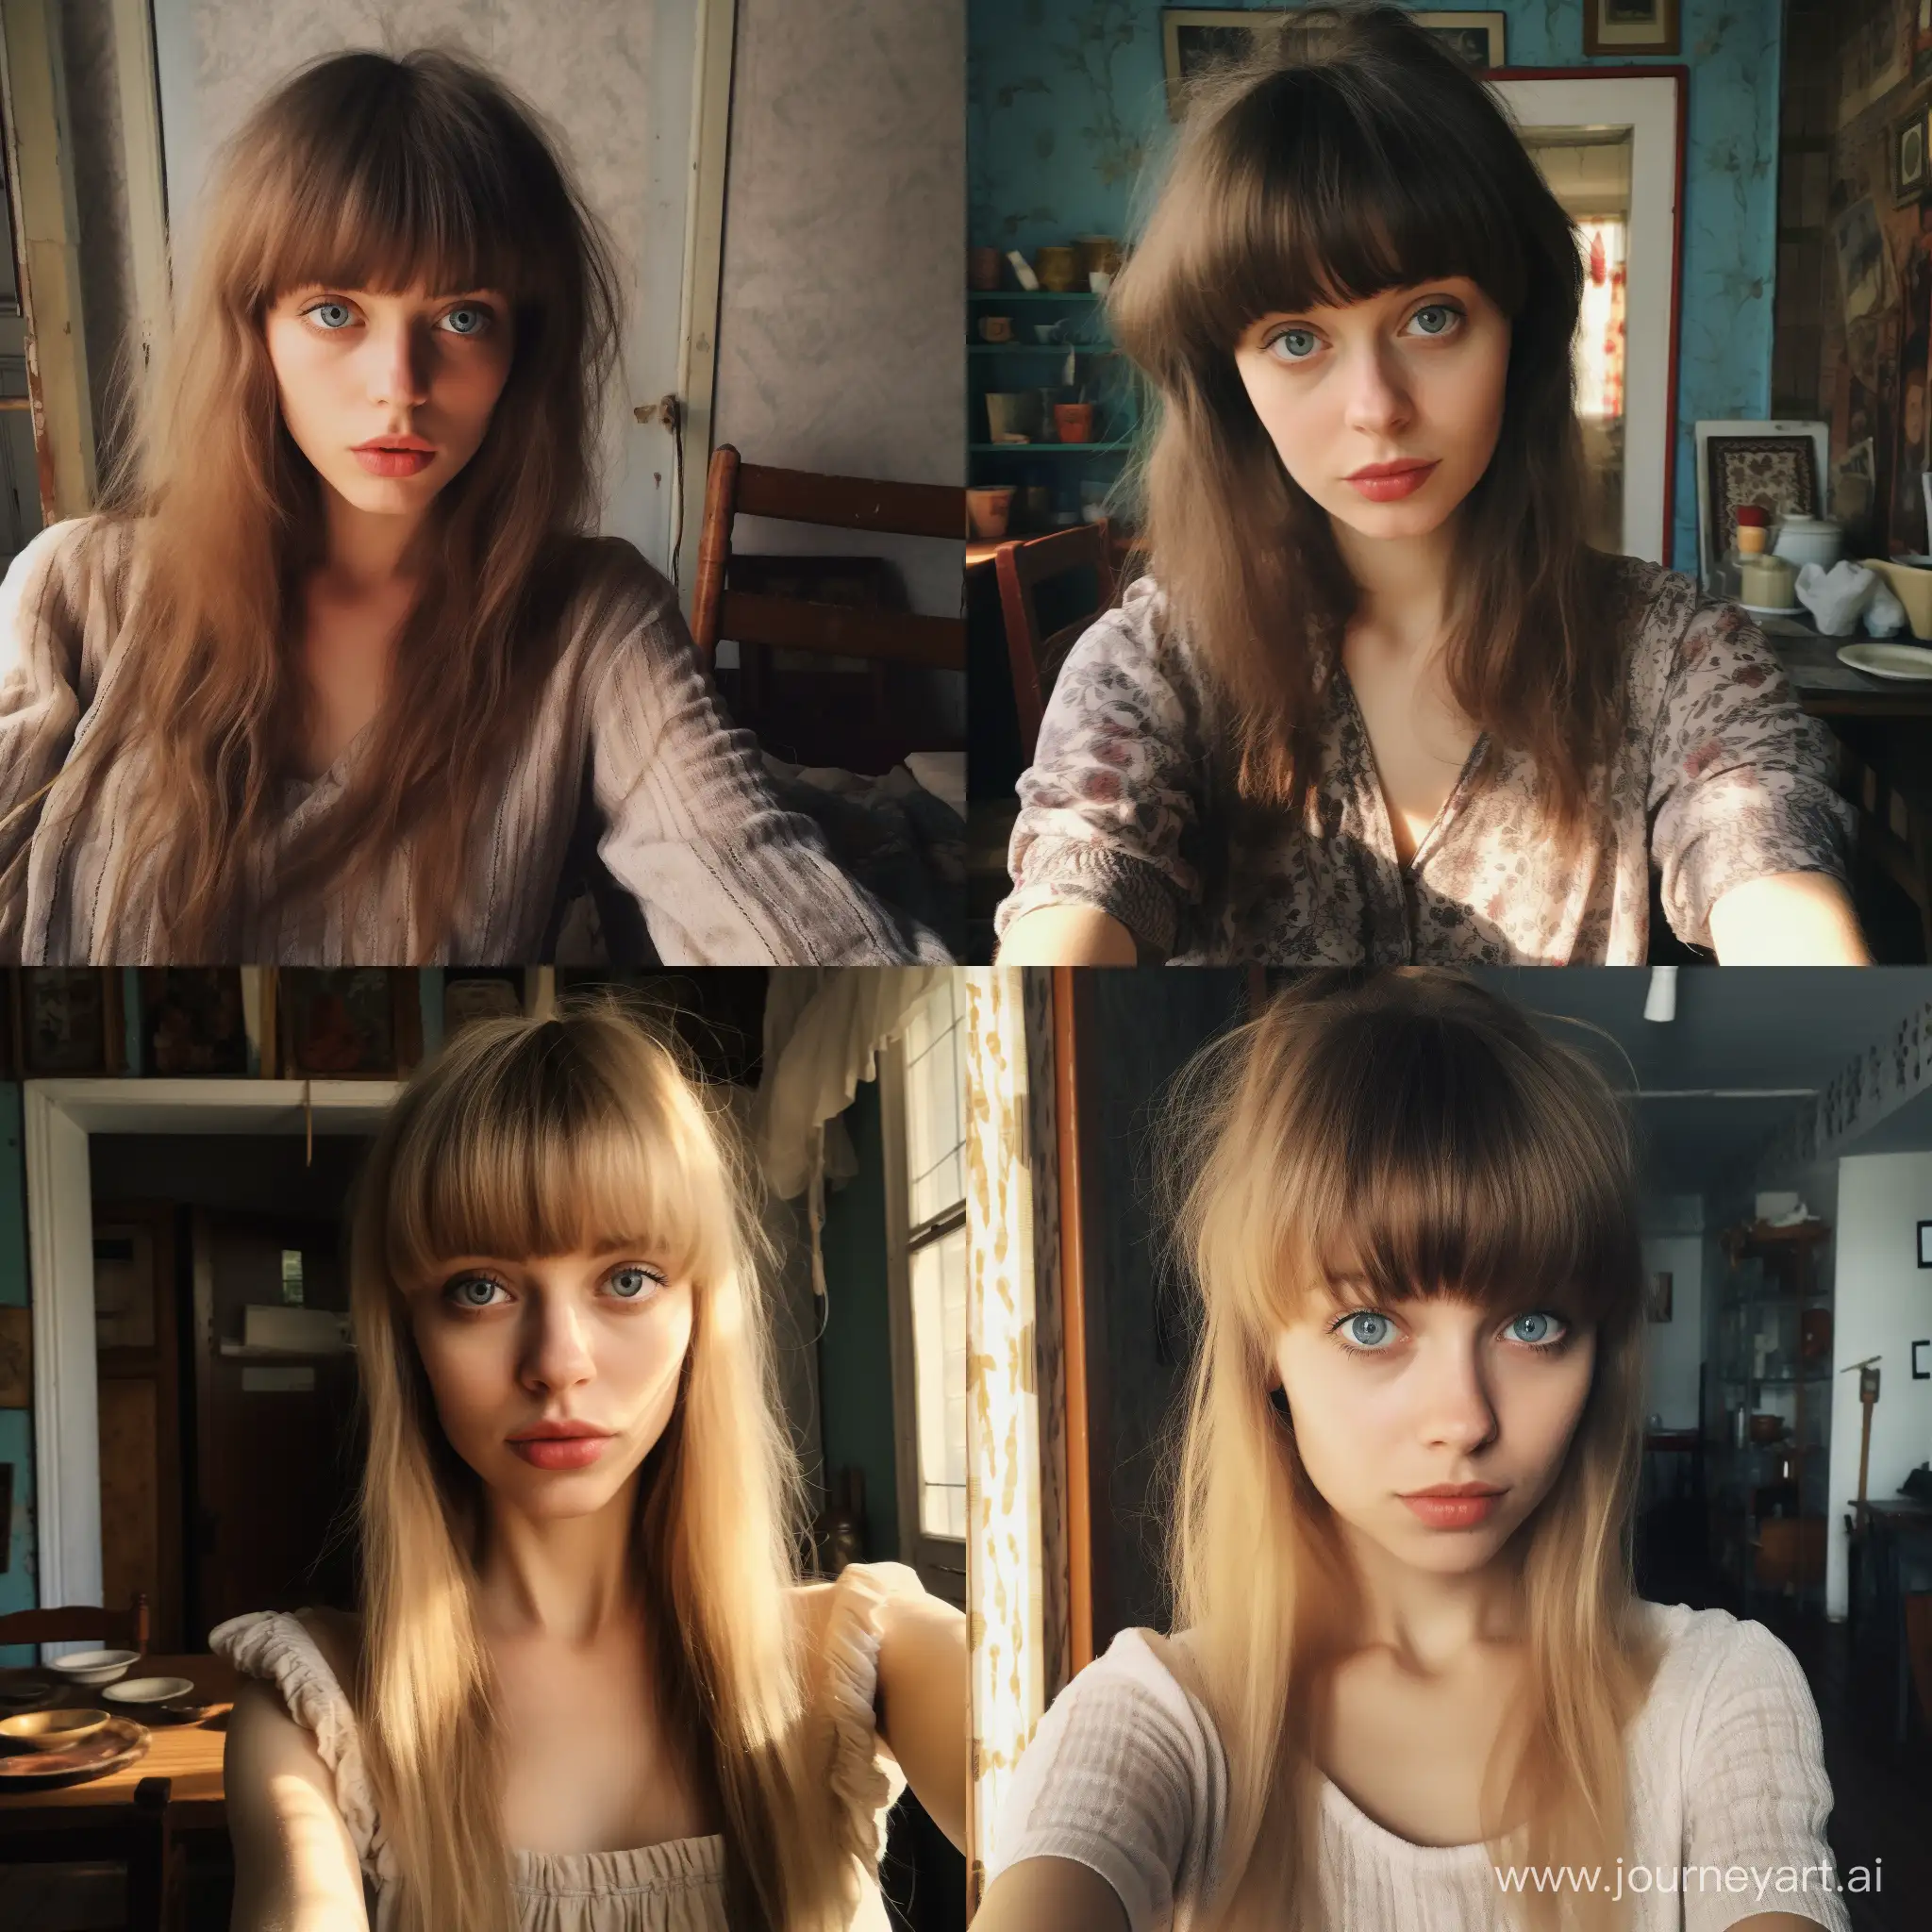 Cozy-Selfie-of-a-Petite-Woman-with-Blue-Eyes-and-Bangs